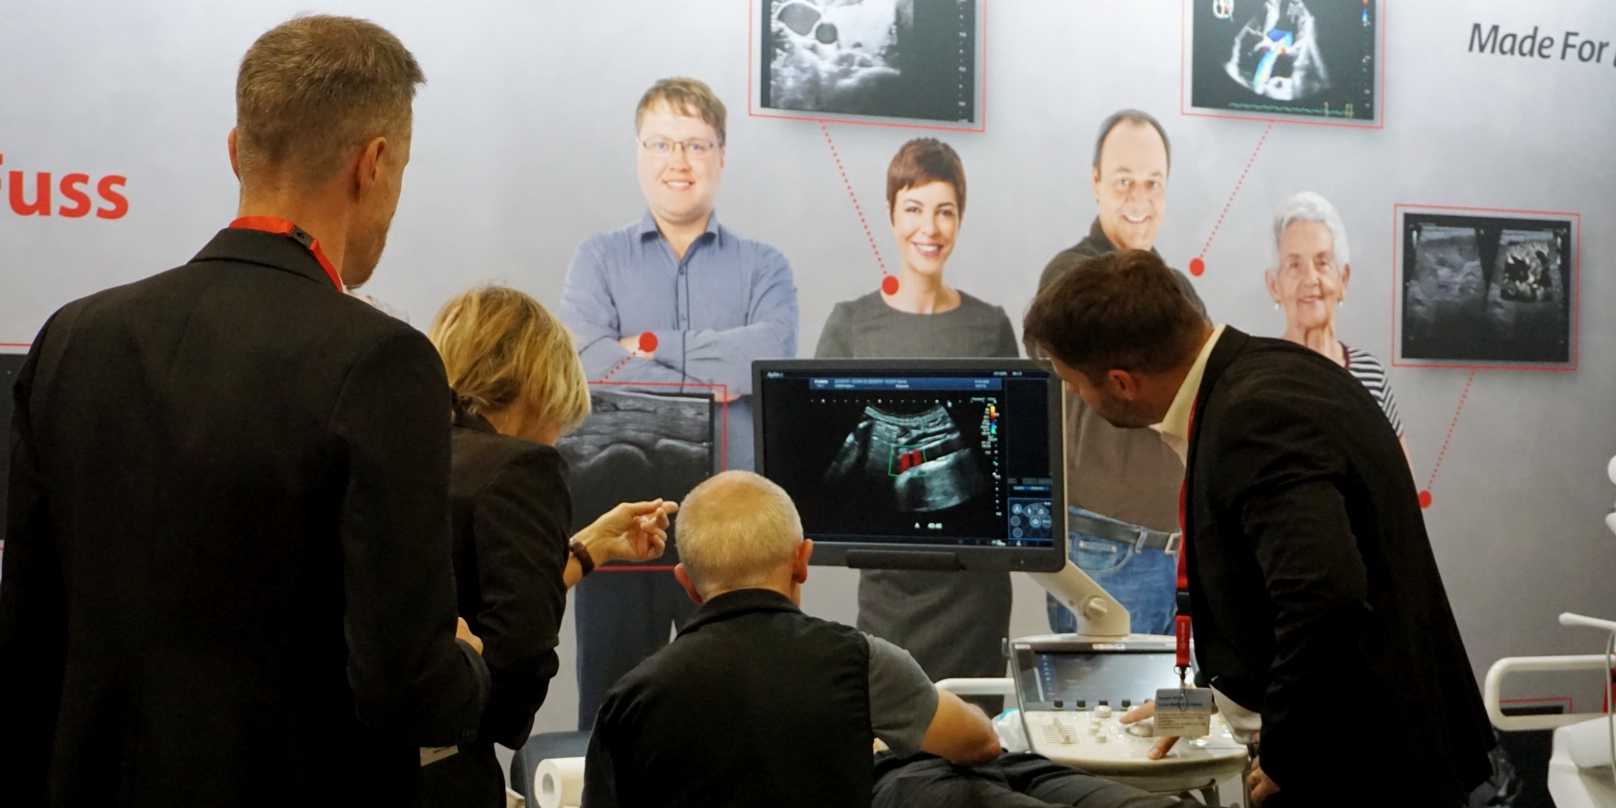 Ultrasound examination at an exhibitor stand